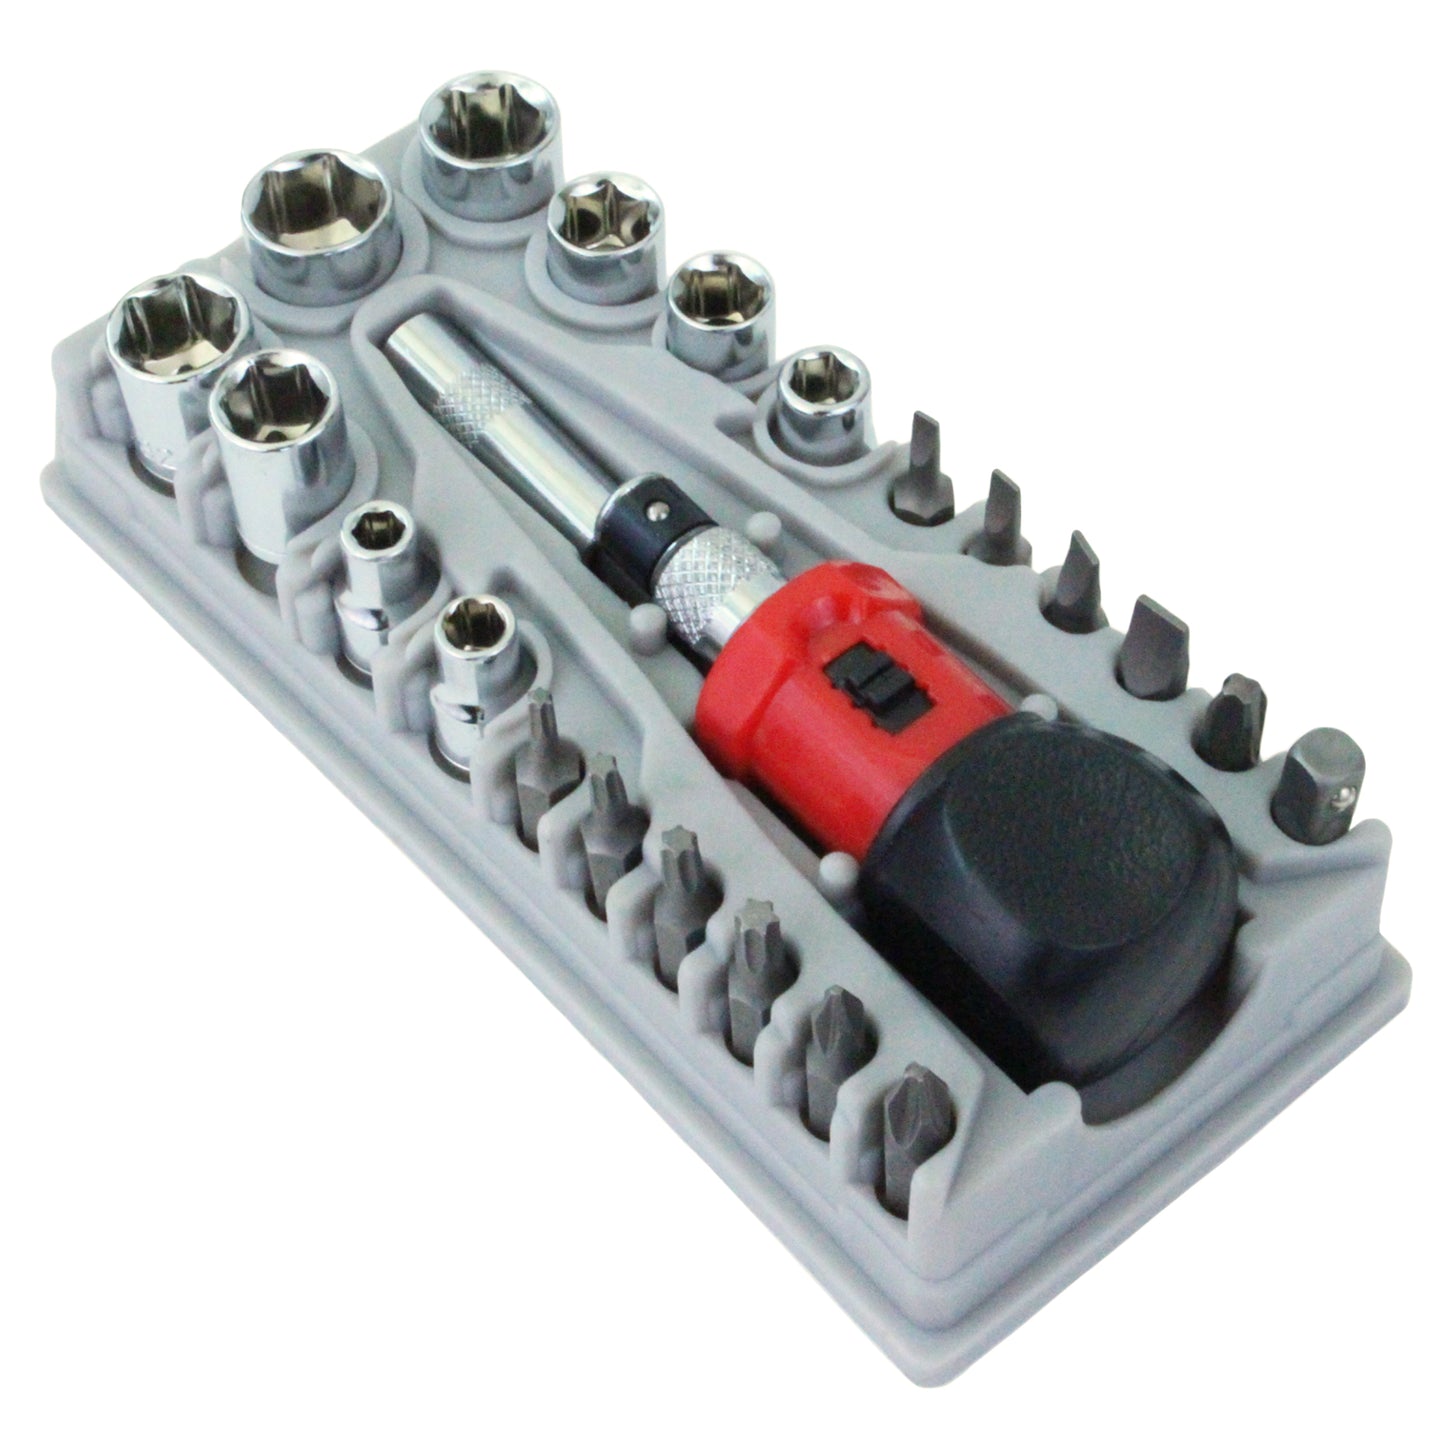 Boxer 24-Piece Compact Ratchet Tool Set for Dynamic Precision